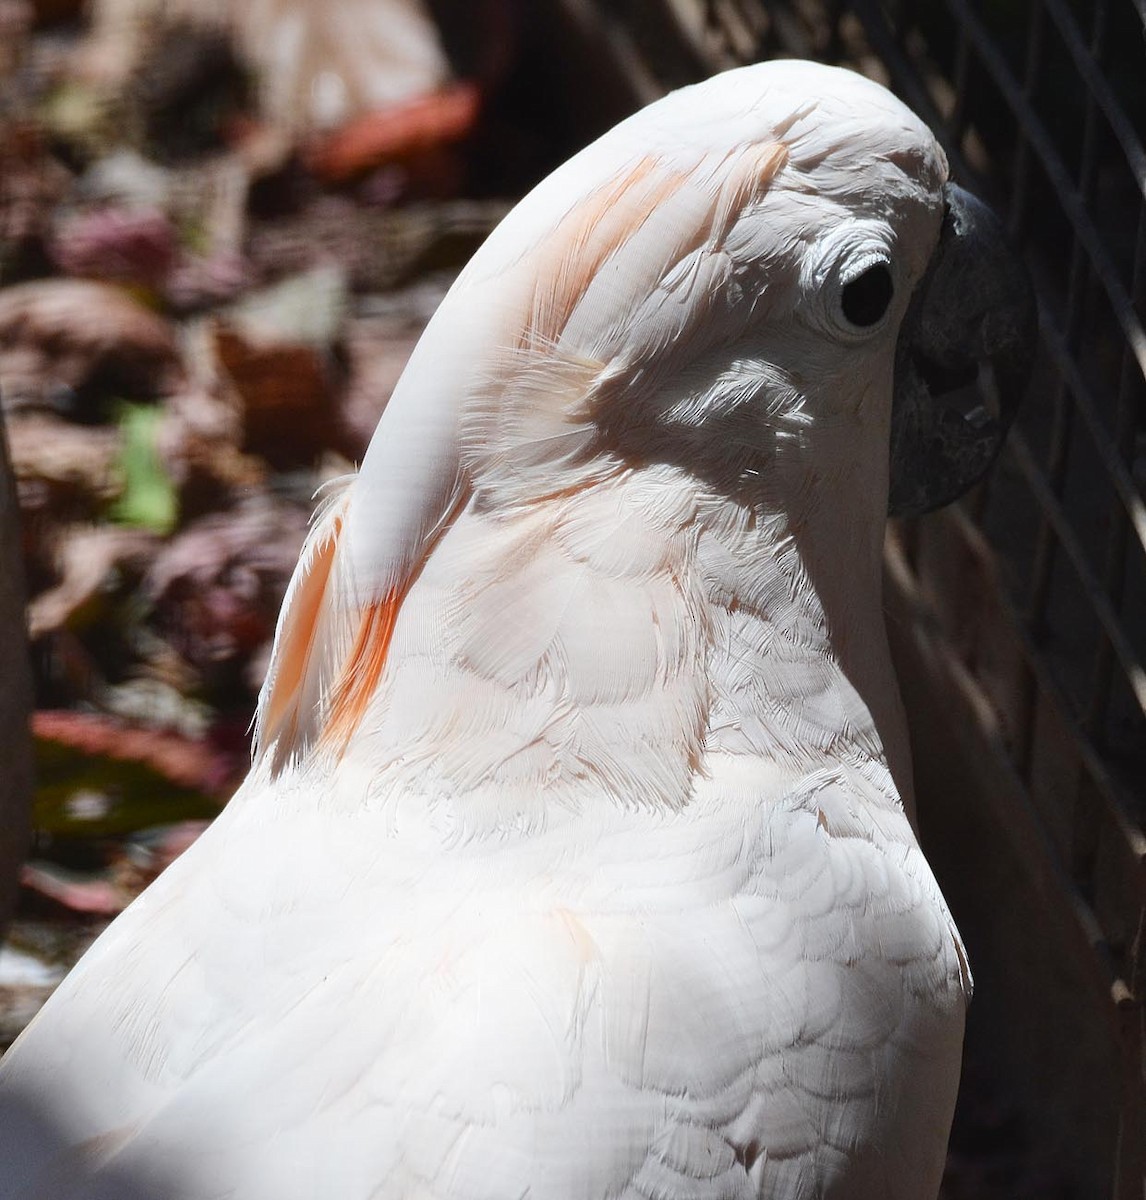 Salmon-crested Cockatoo - A Emmerson